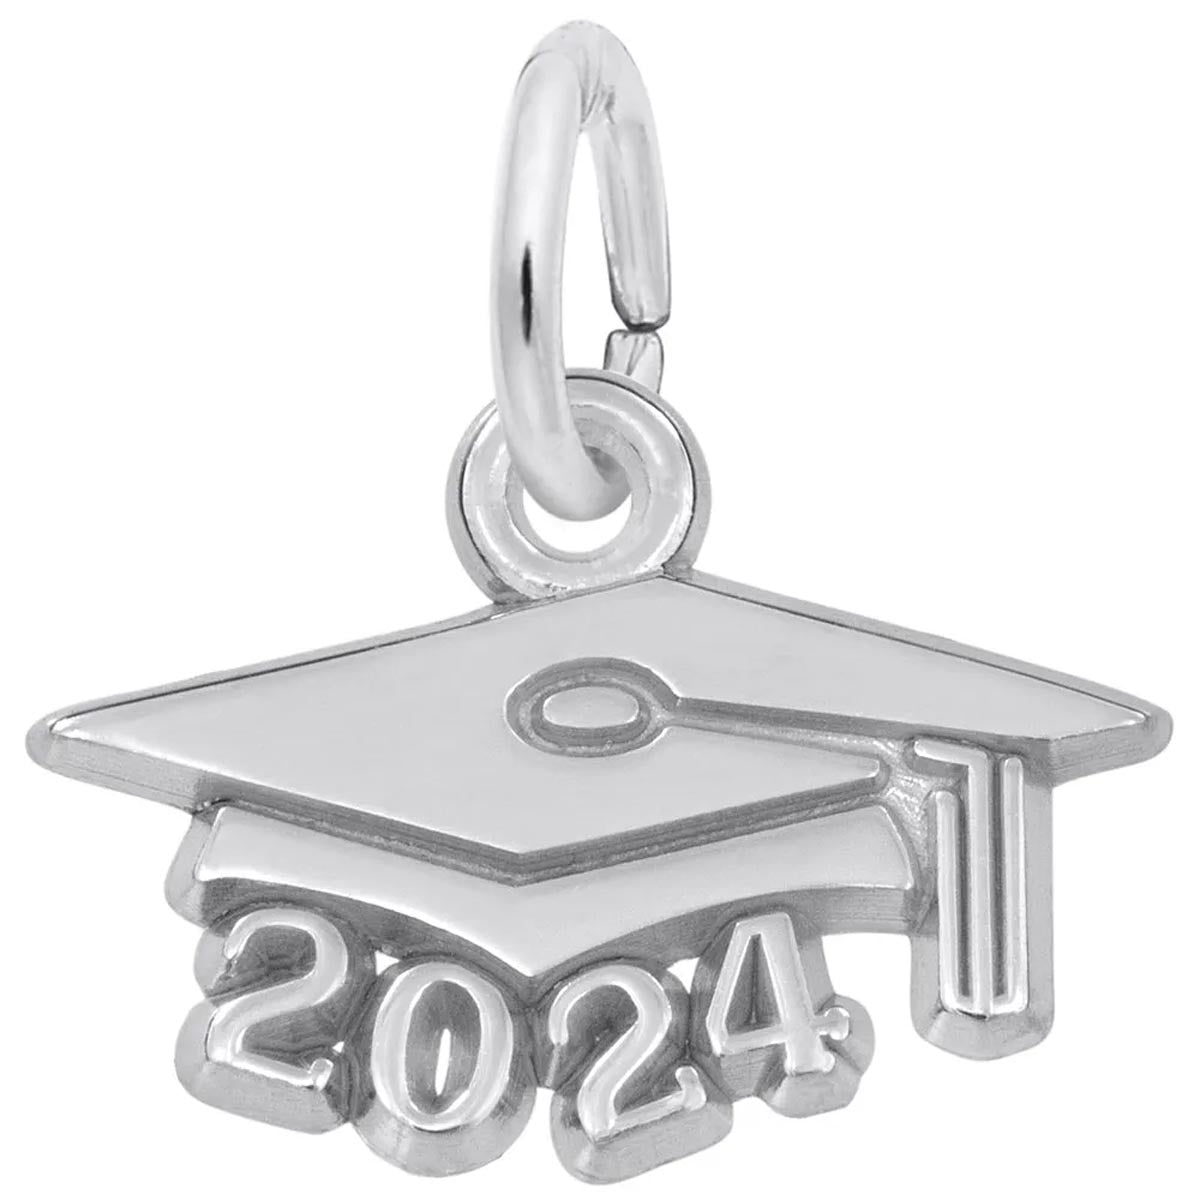 2024 Graduation Cap Charm in Sterling Silver